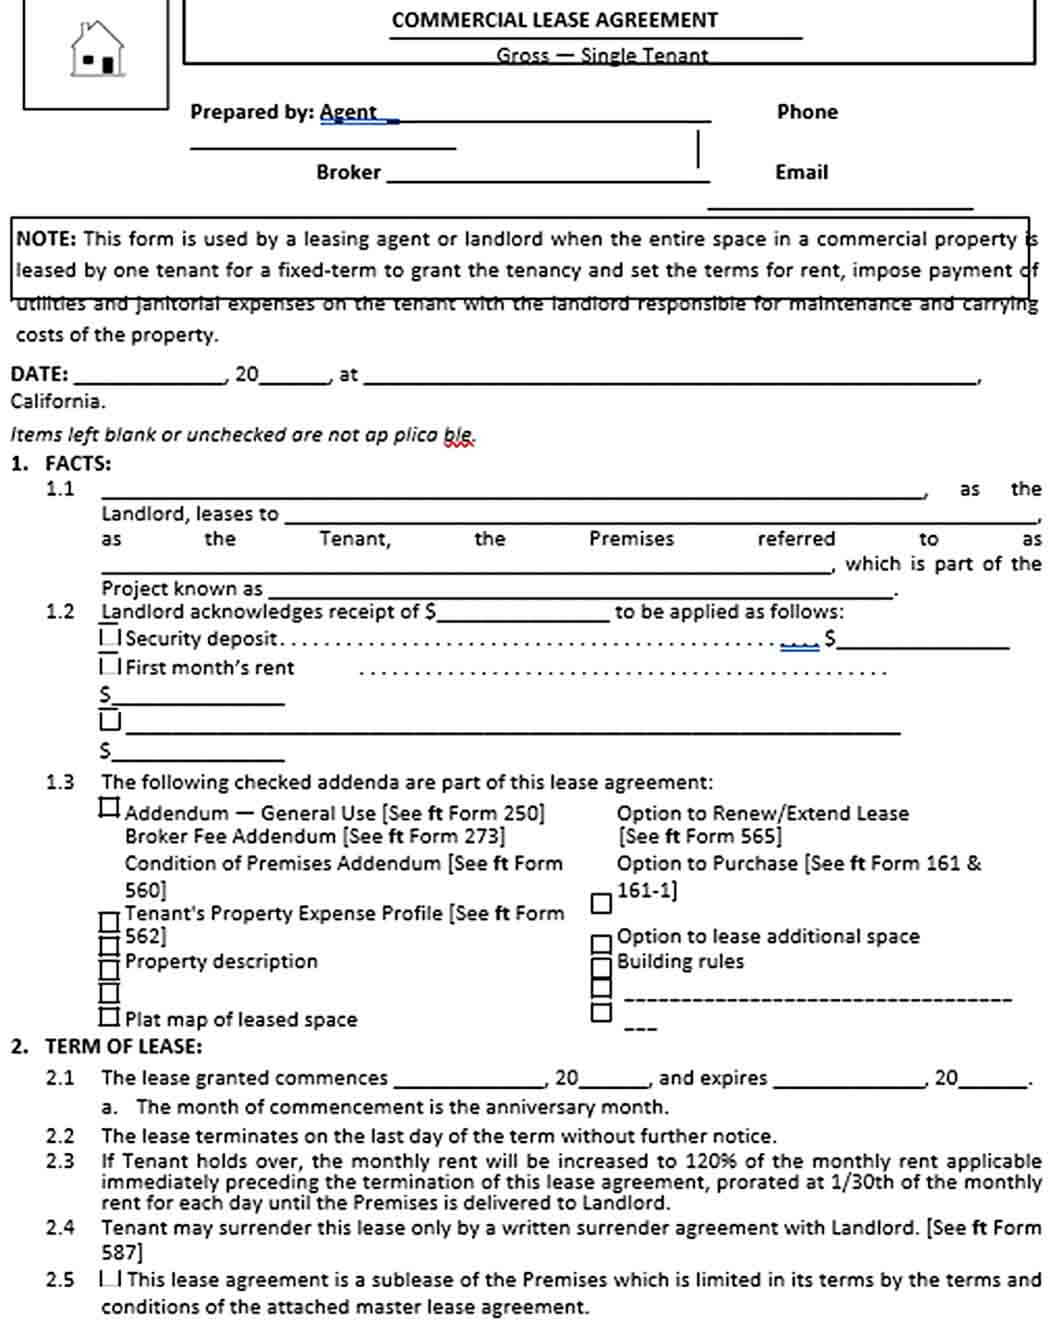 Sample Commercial Lease Agreement Example